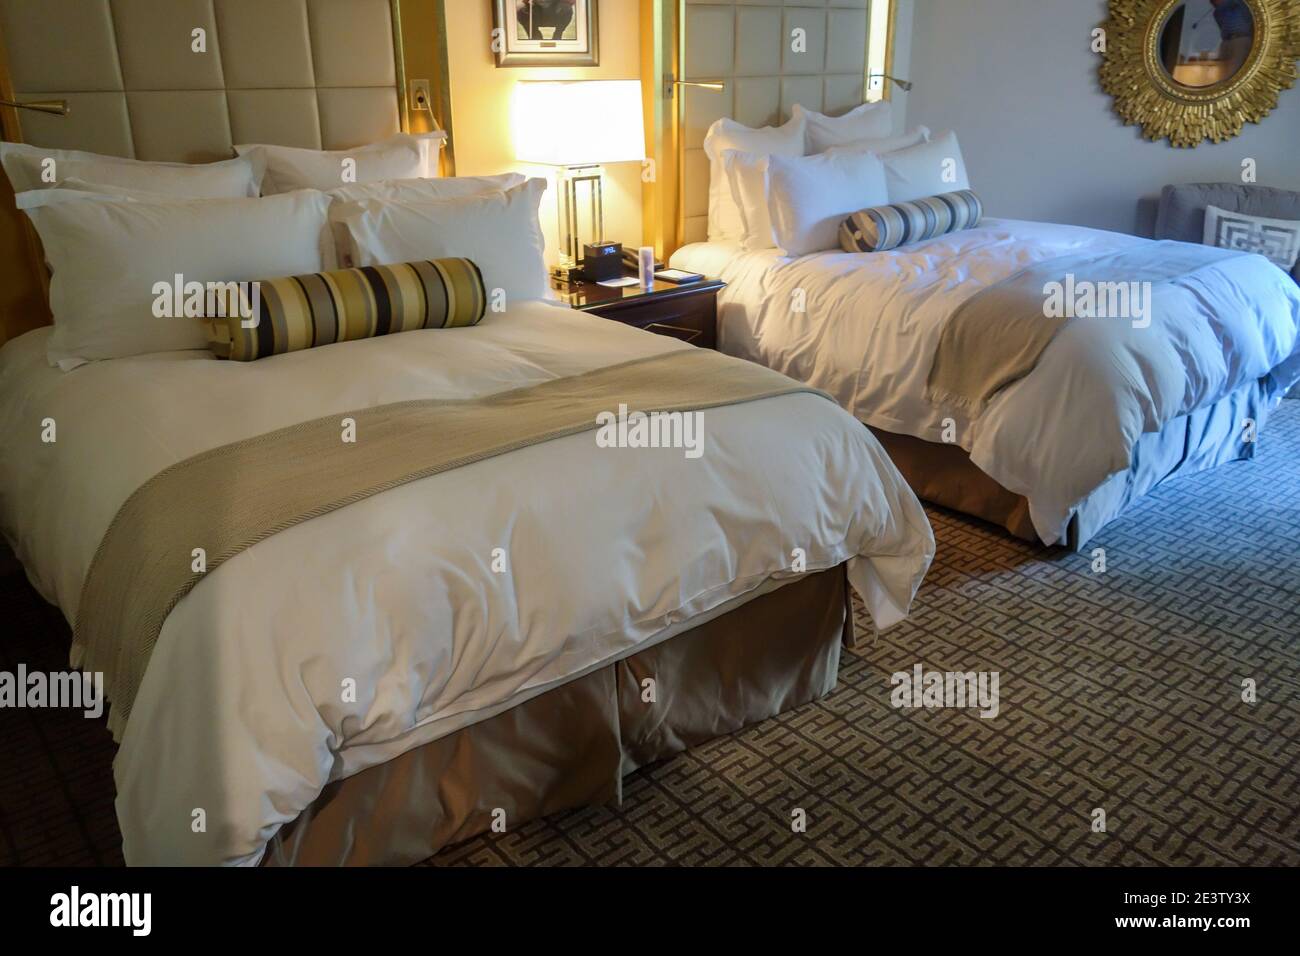 United States, Miami, Hotel Trump National Doral Golf Resort. Luxury hotel for celebrities, wealthy people and top athletes like golfers. Interior of Stock Photo